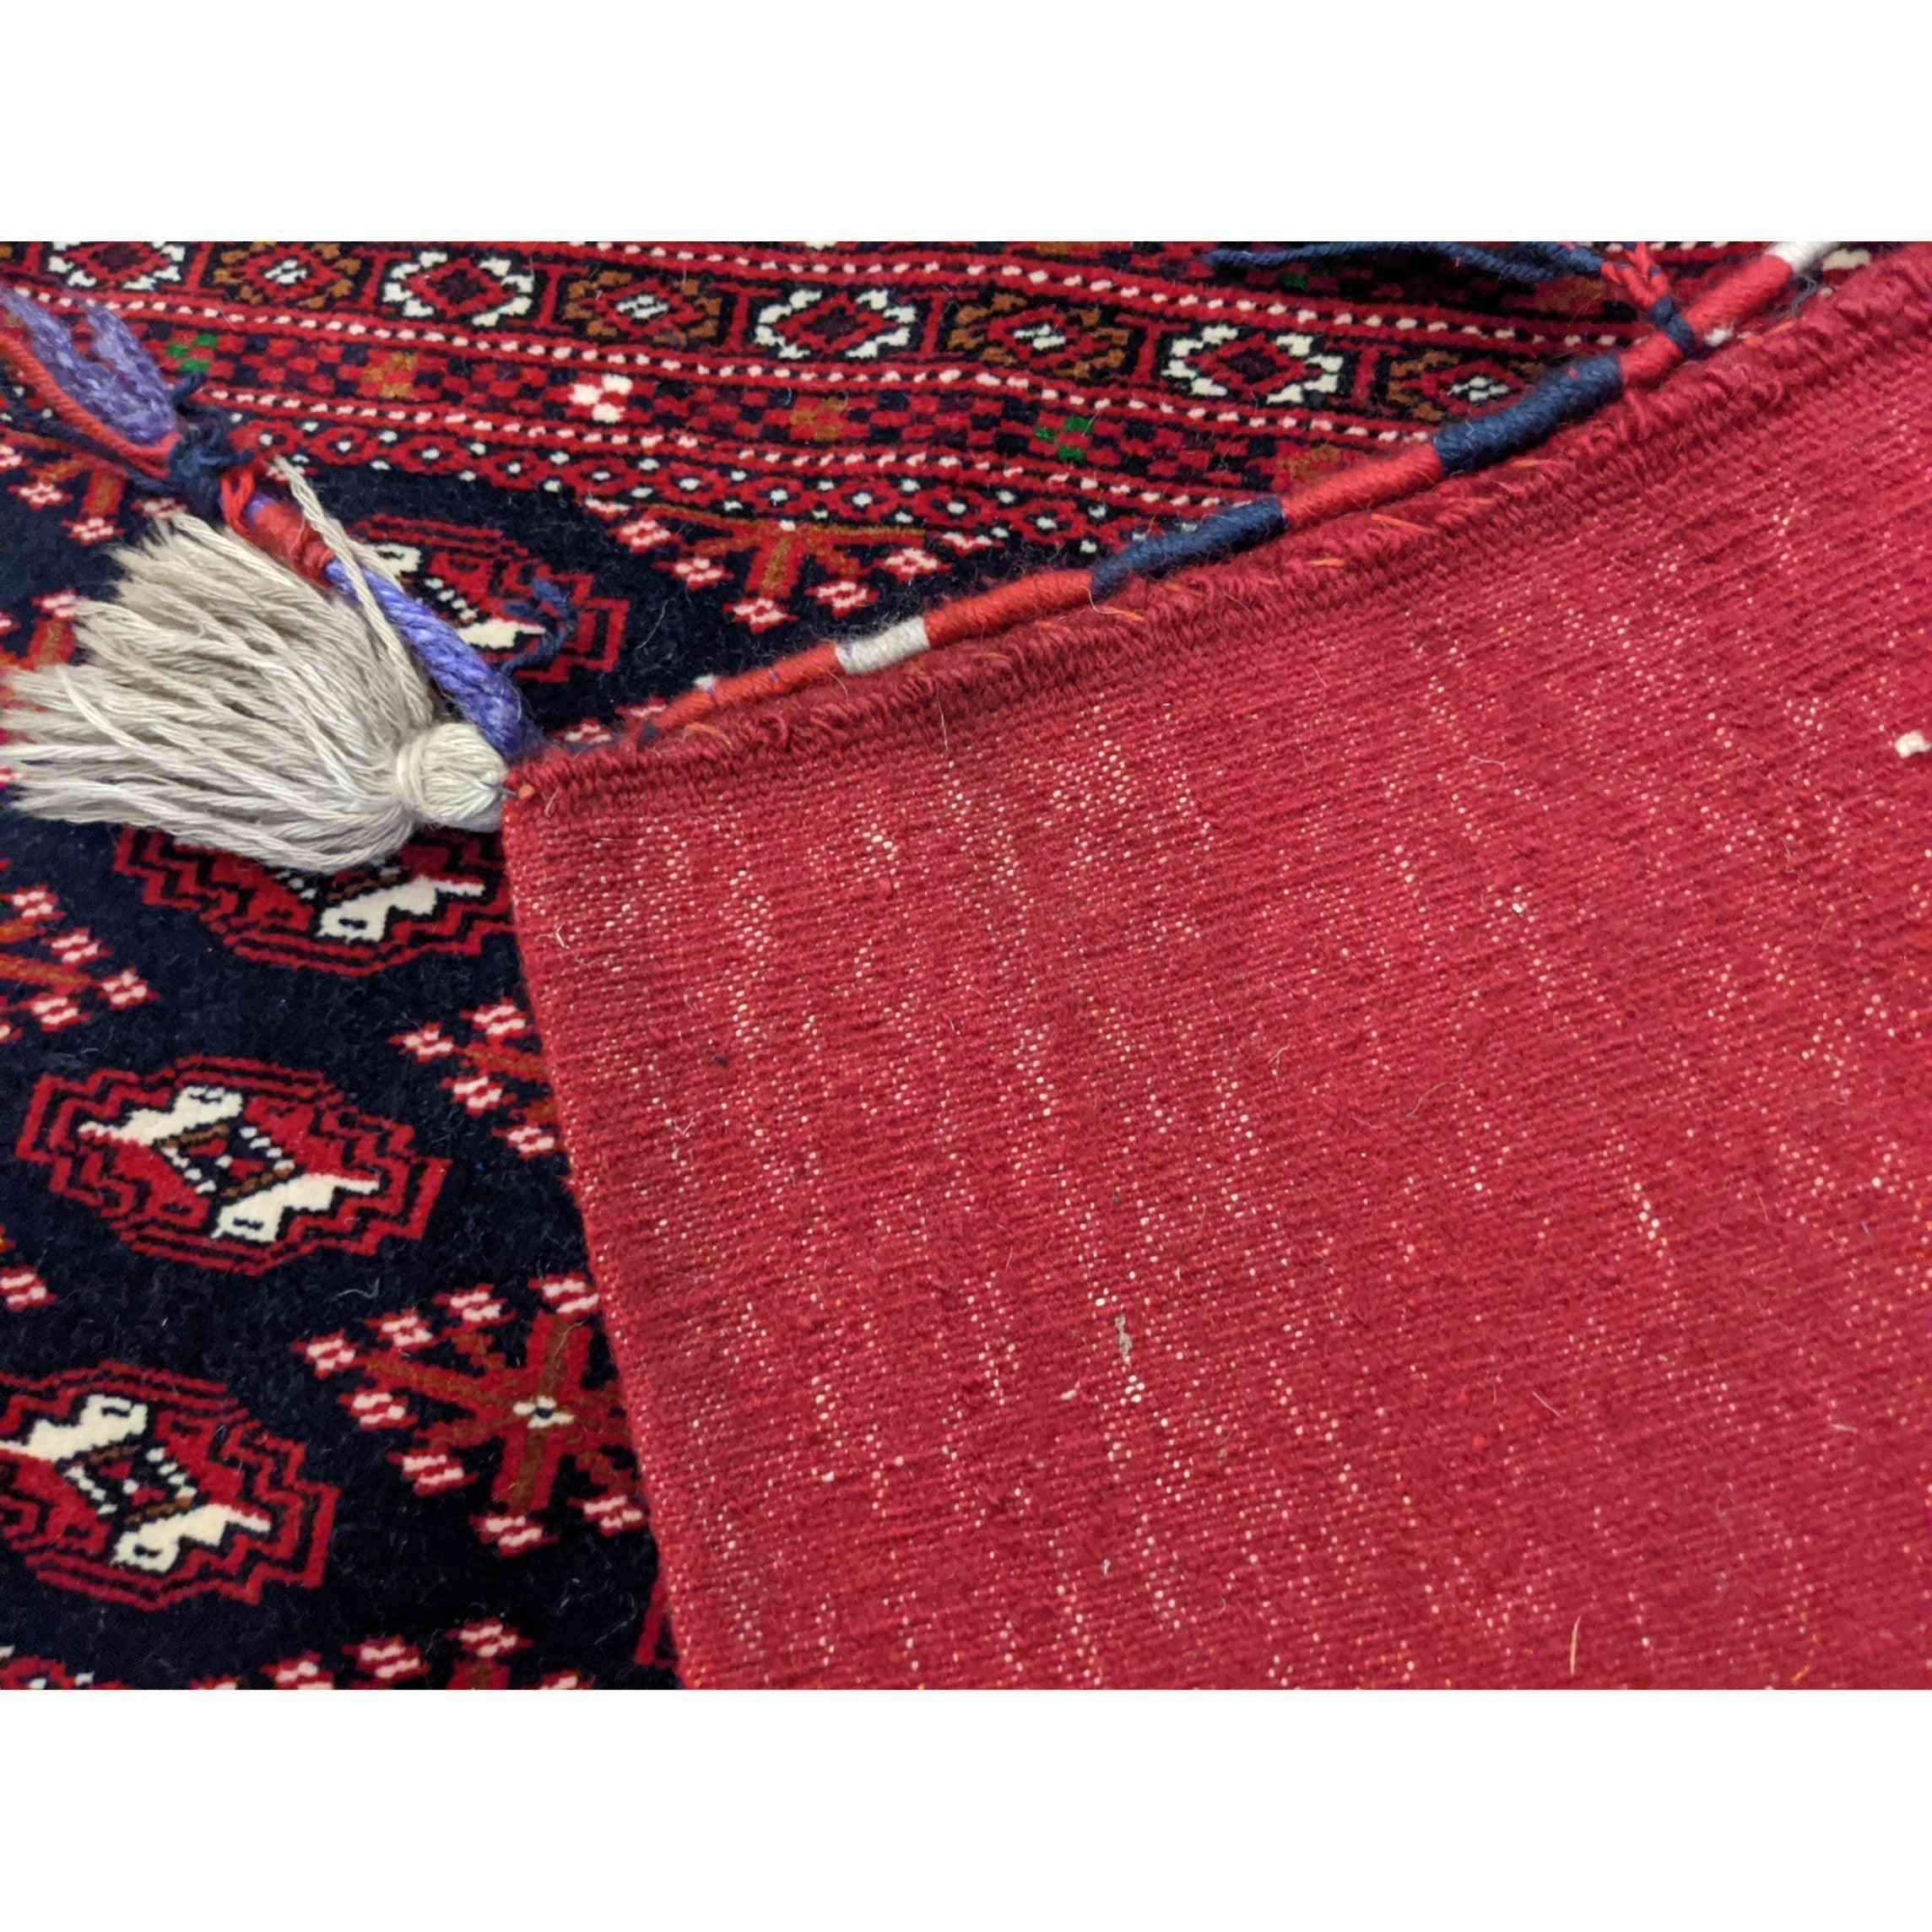 95 x 53 cm Turkomen Cousian bag Tribal Red Small Rug - Rugmaster